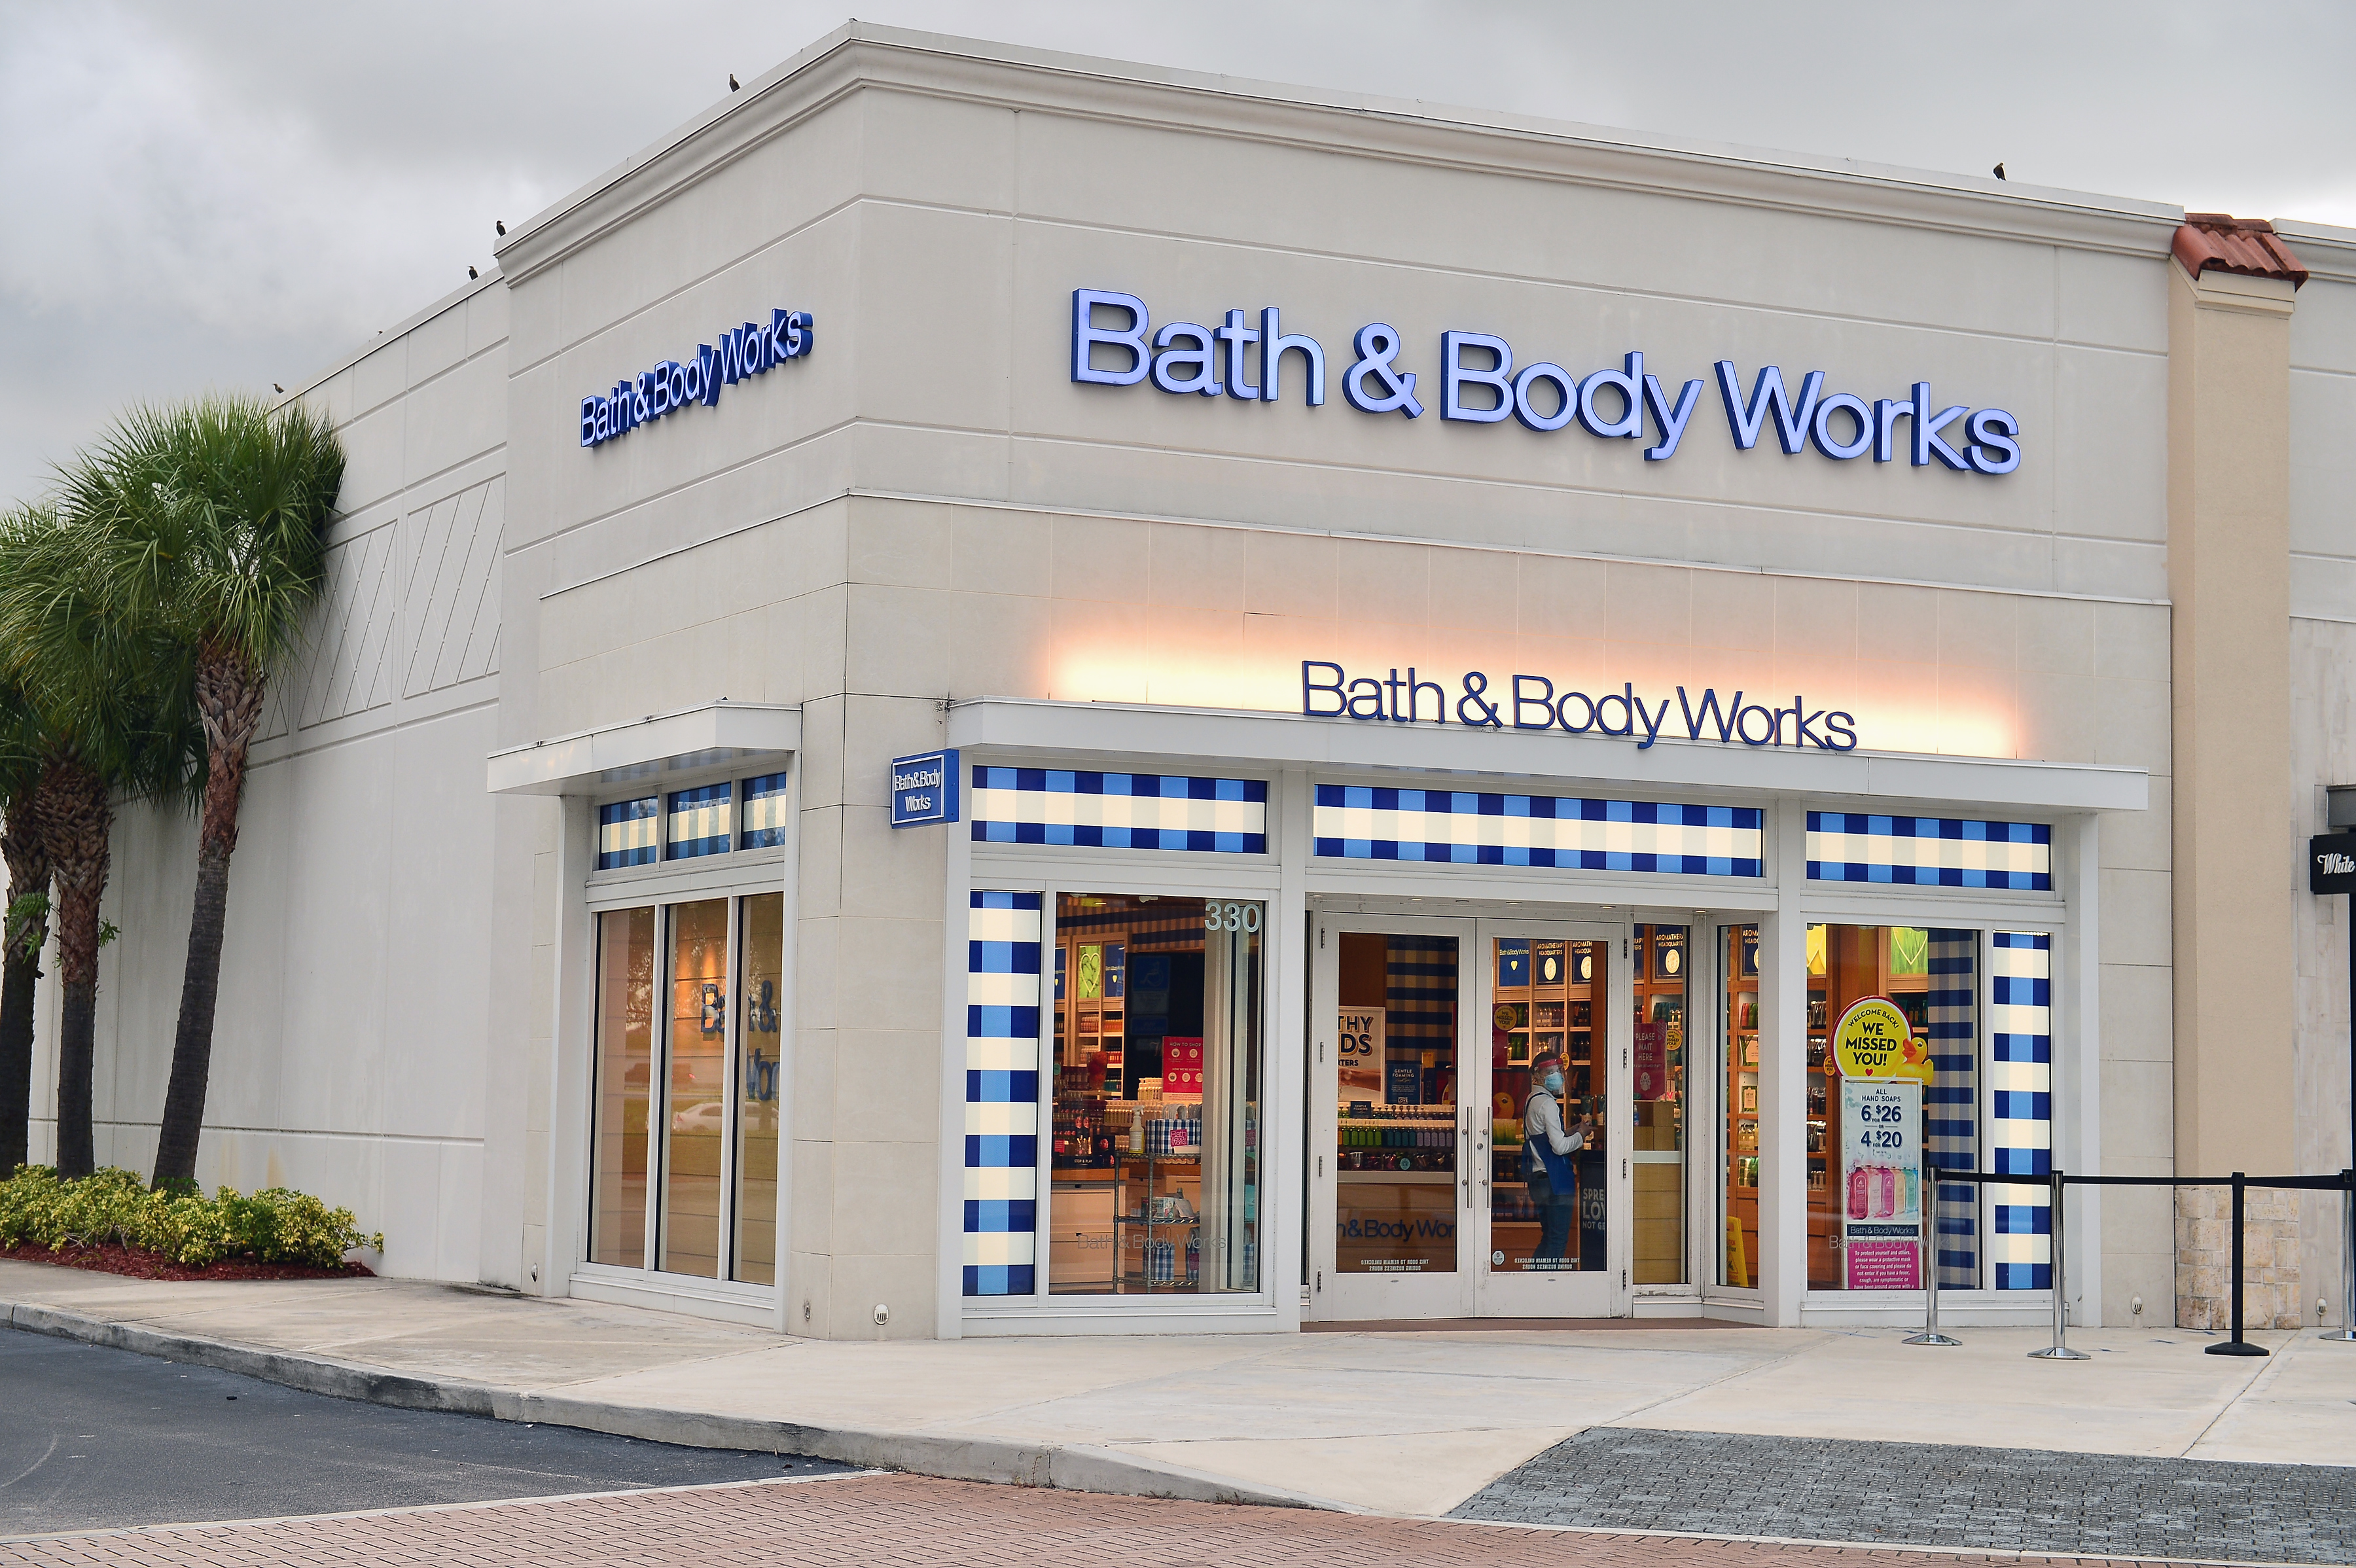 Bath & Body Works Blasts Woman for Claiming Products Cause Infertility